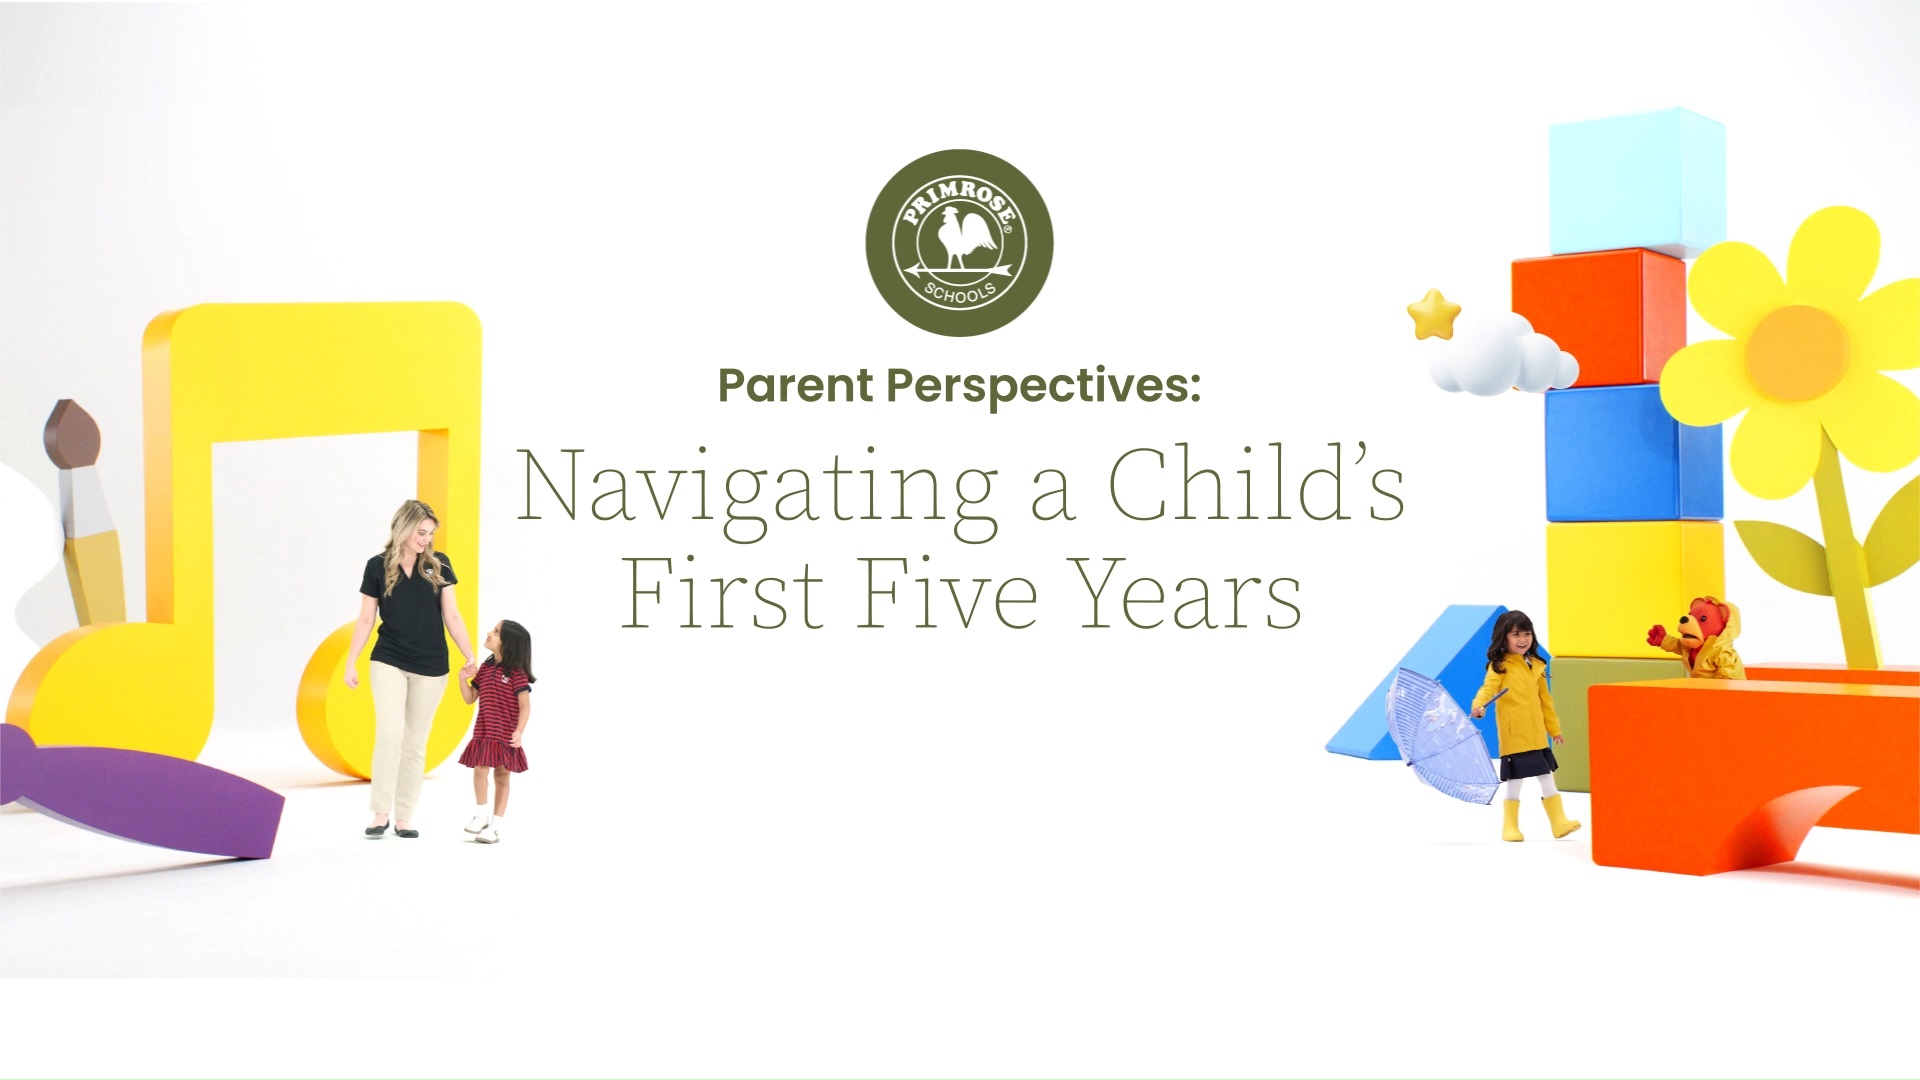 A recent survey proves that parents face several challenges including teaching positive behaviors to support their child’s development in the first five years.